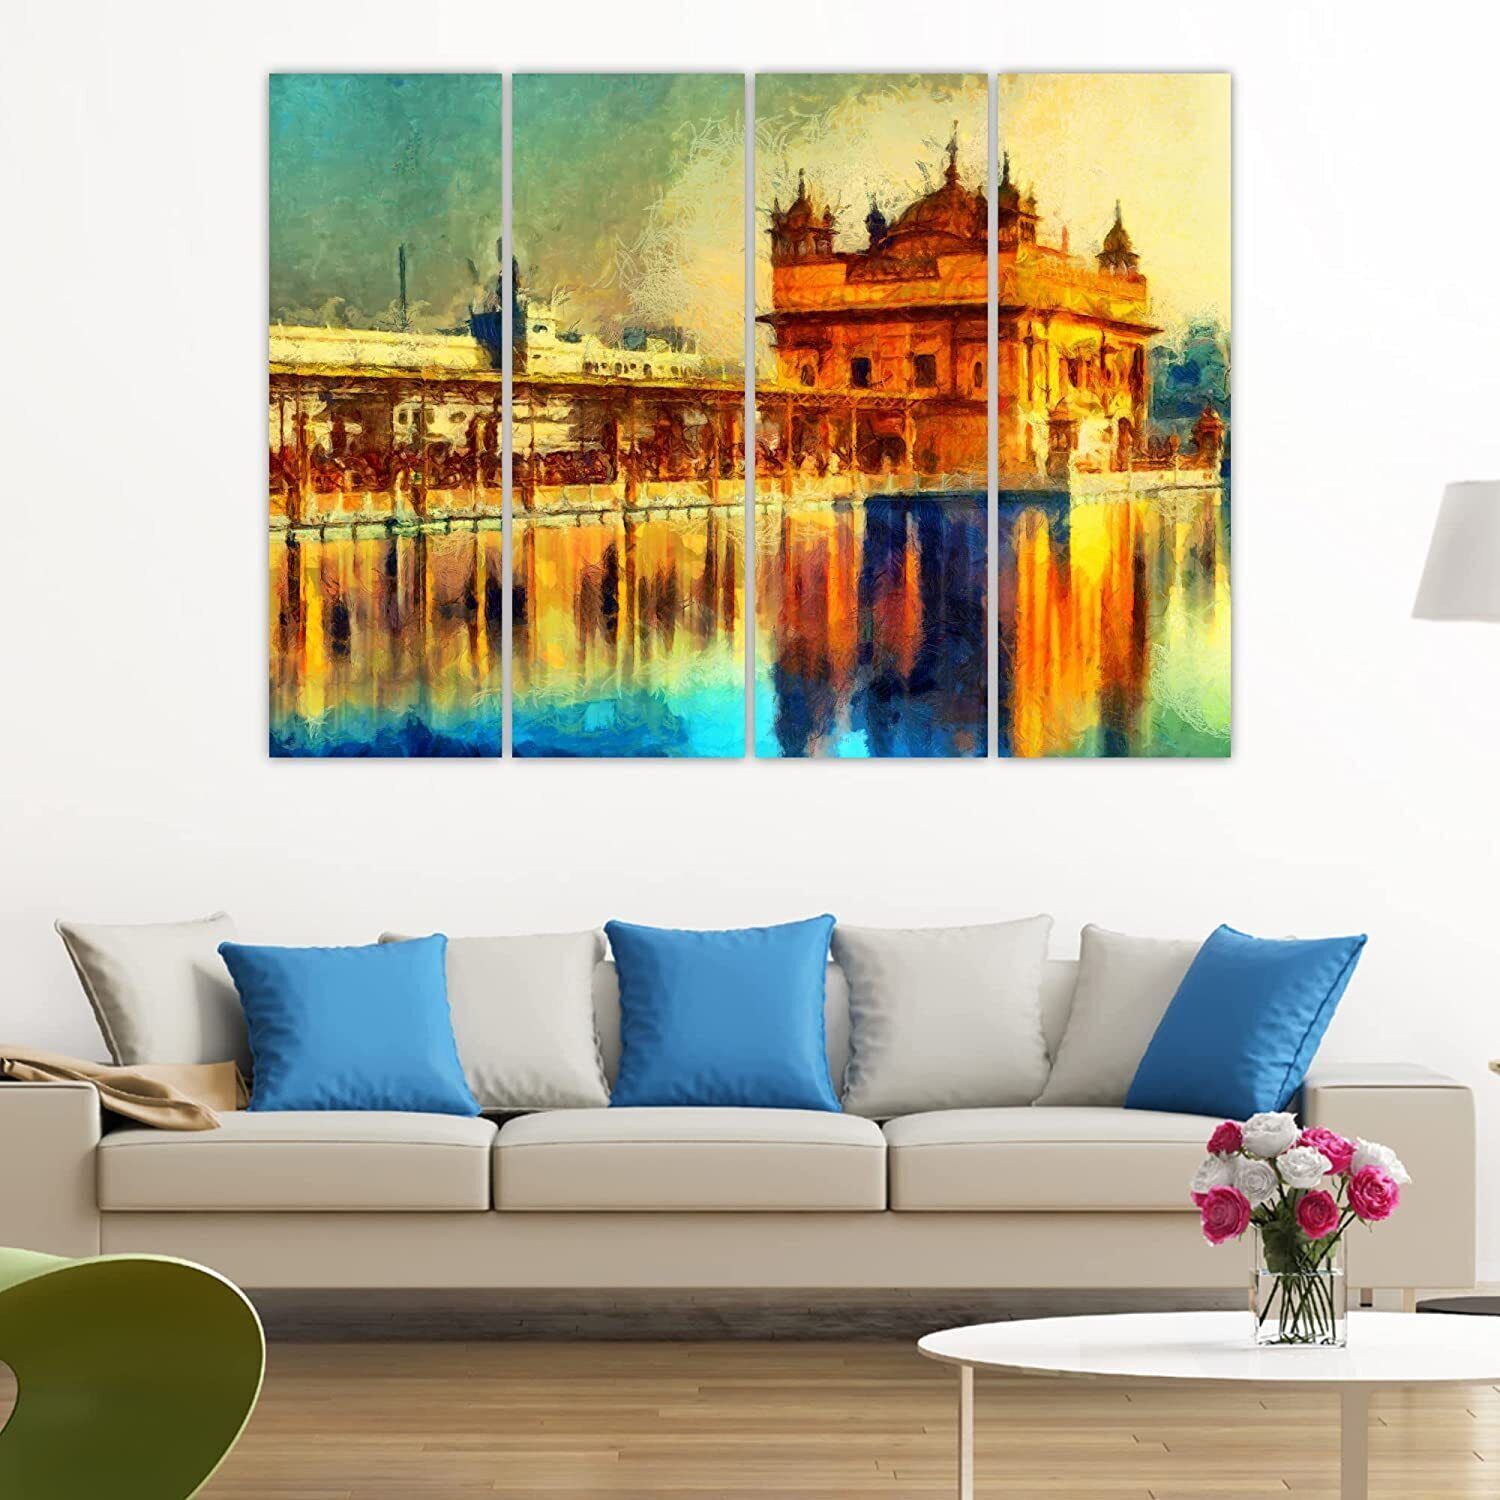 Indian Traditional Golden Temple Wall Painting For Home Decor